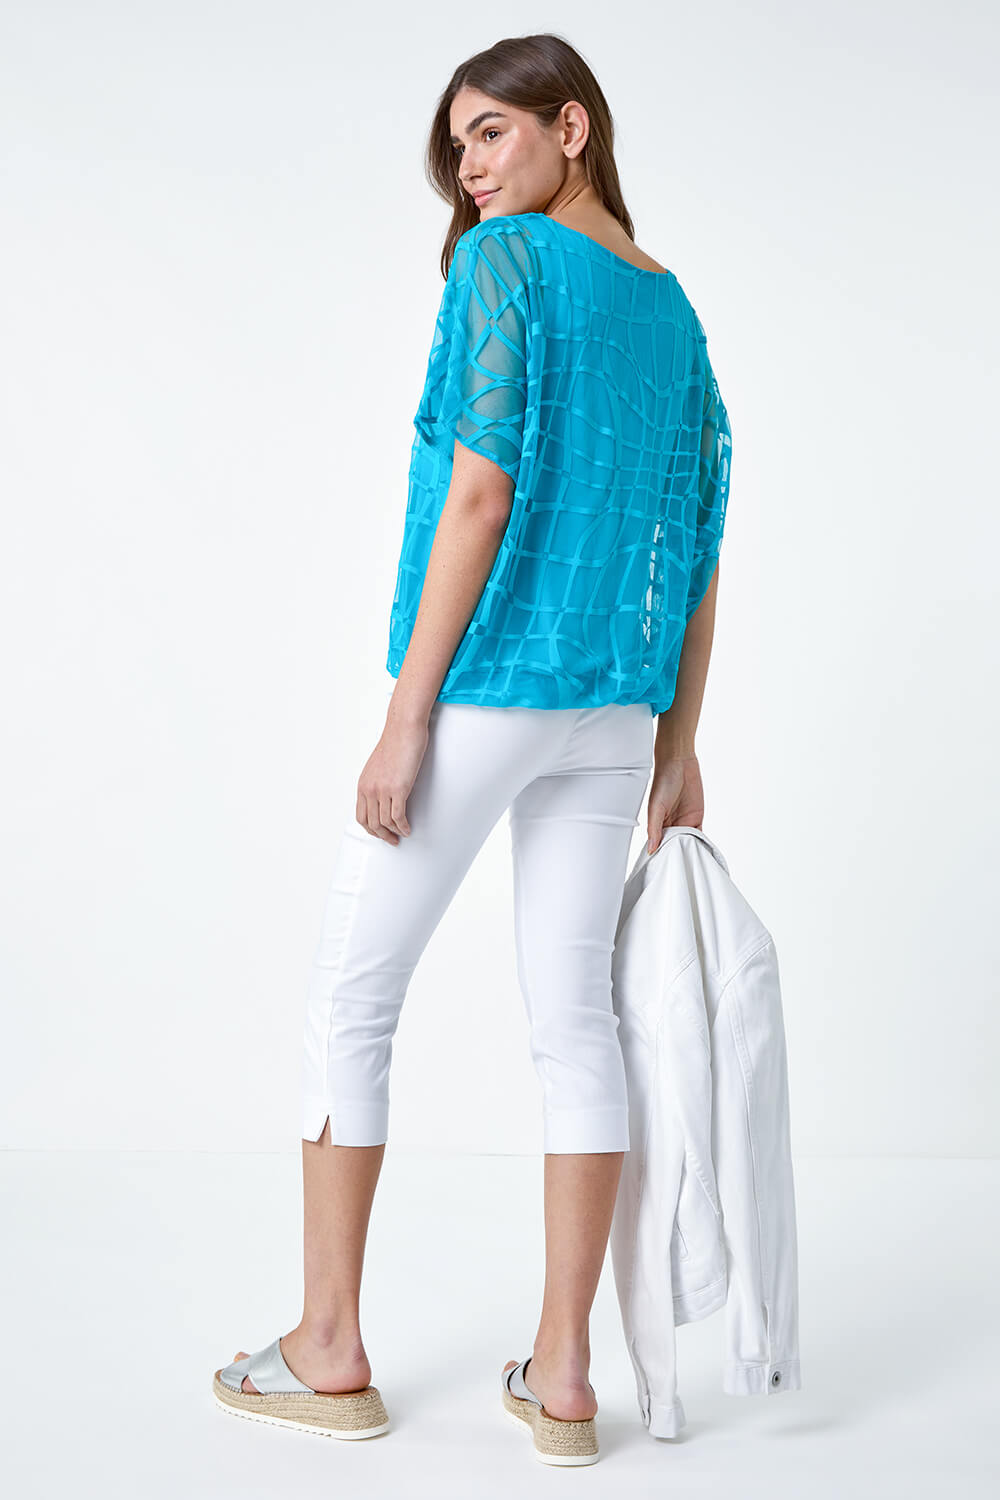 Turquoise Abstract Check Print Blouson Top, Image 3 of 5